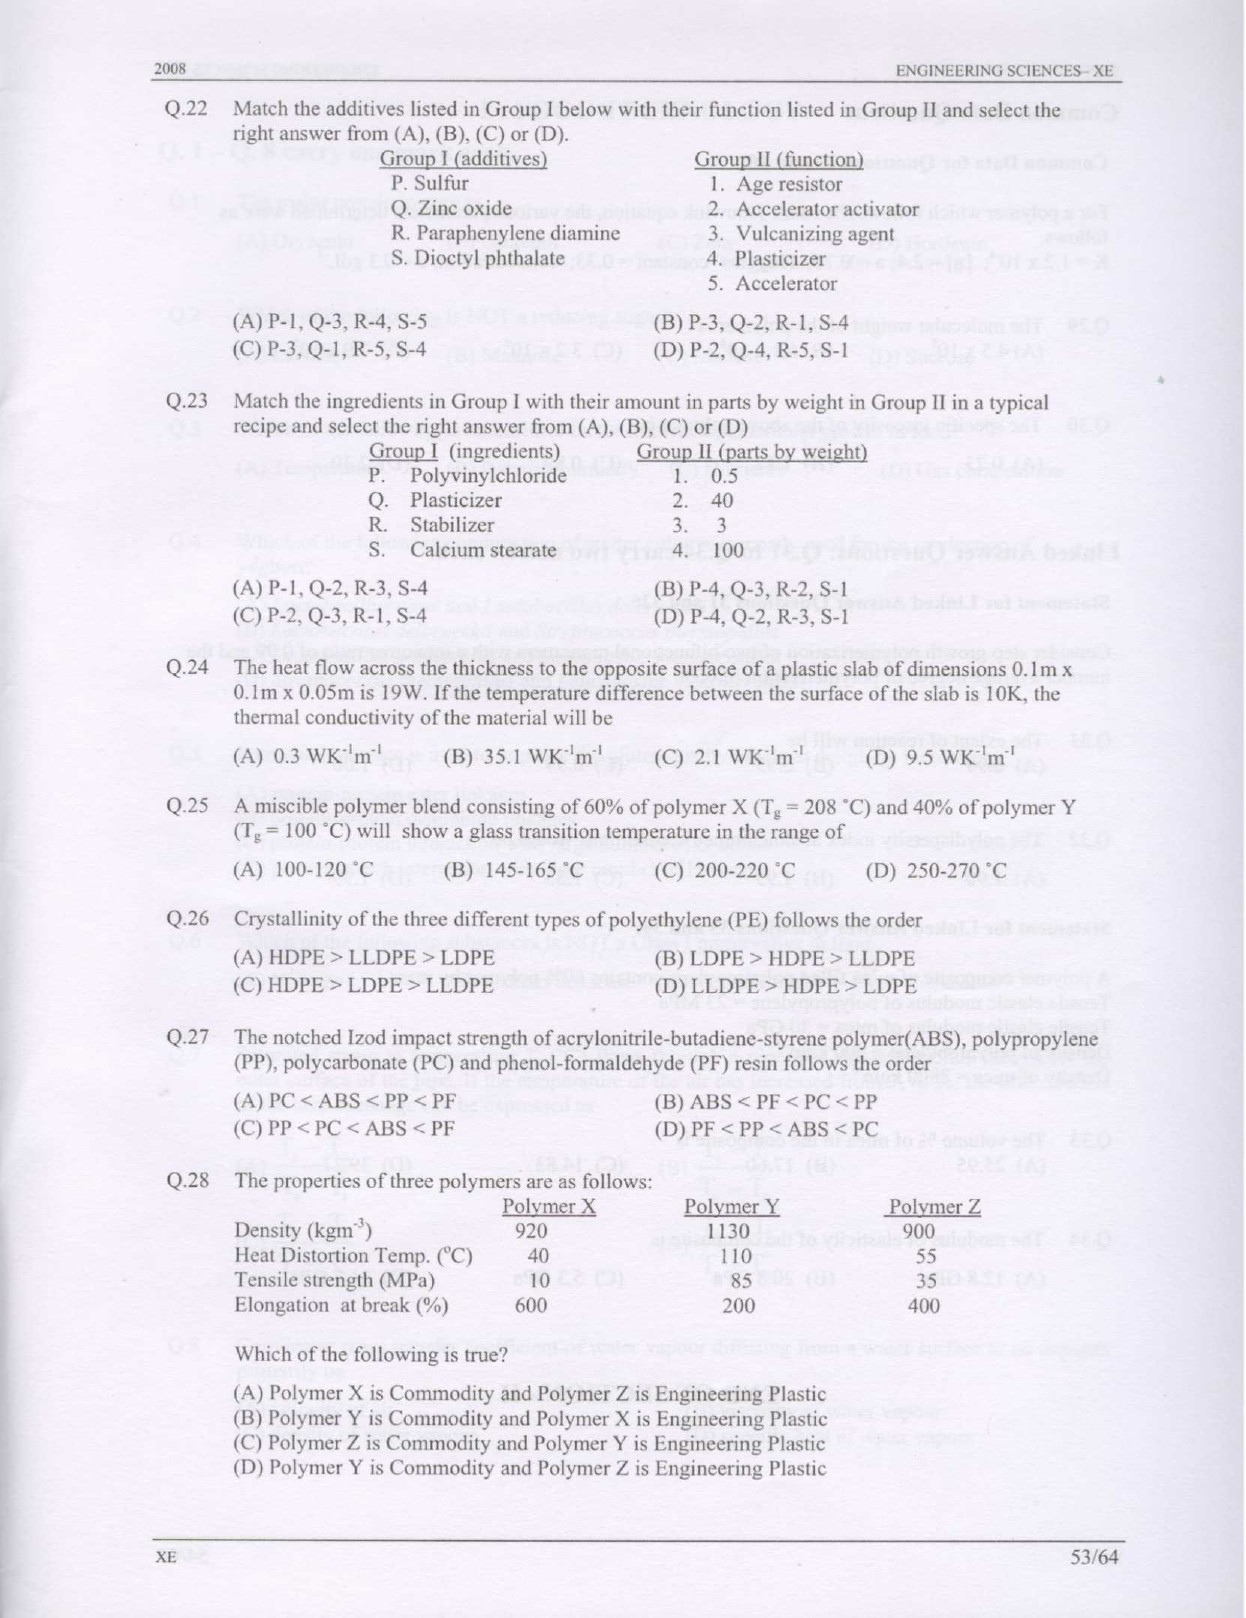 GATE Exam Question Paper 2008 Engineering Sciences 53